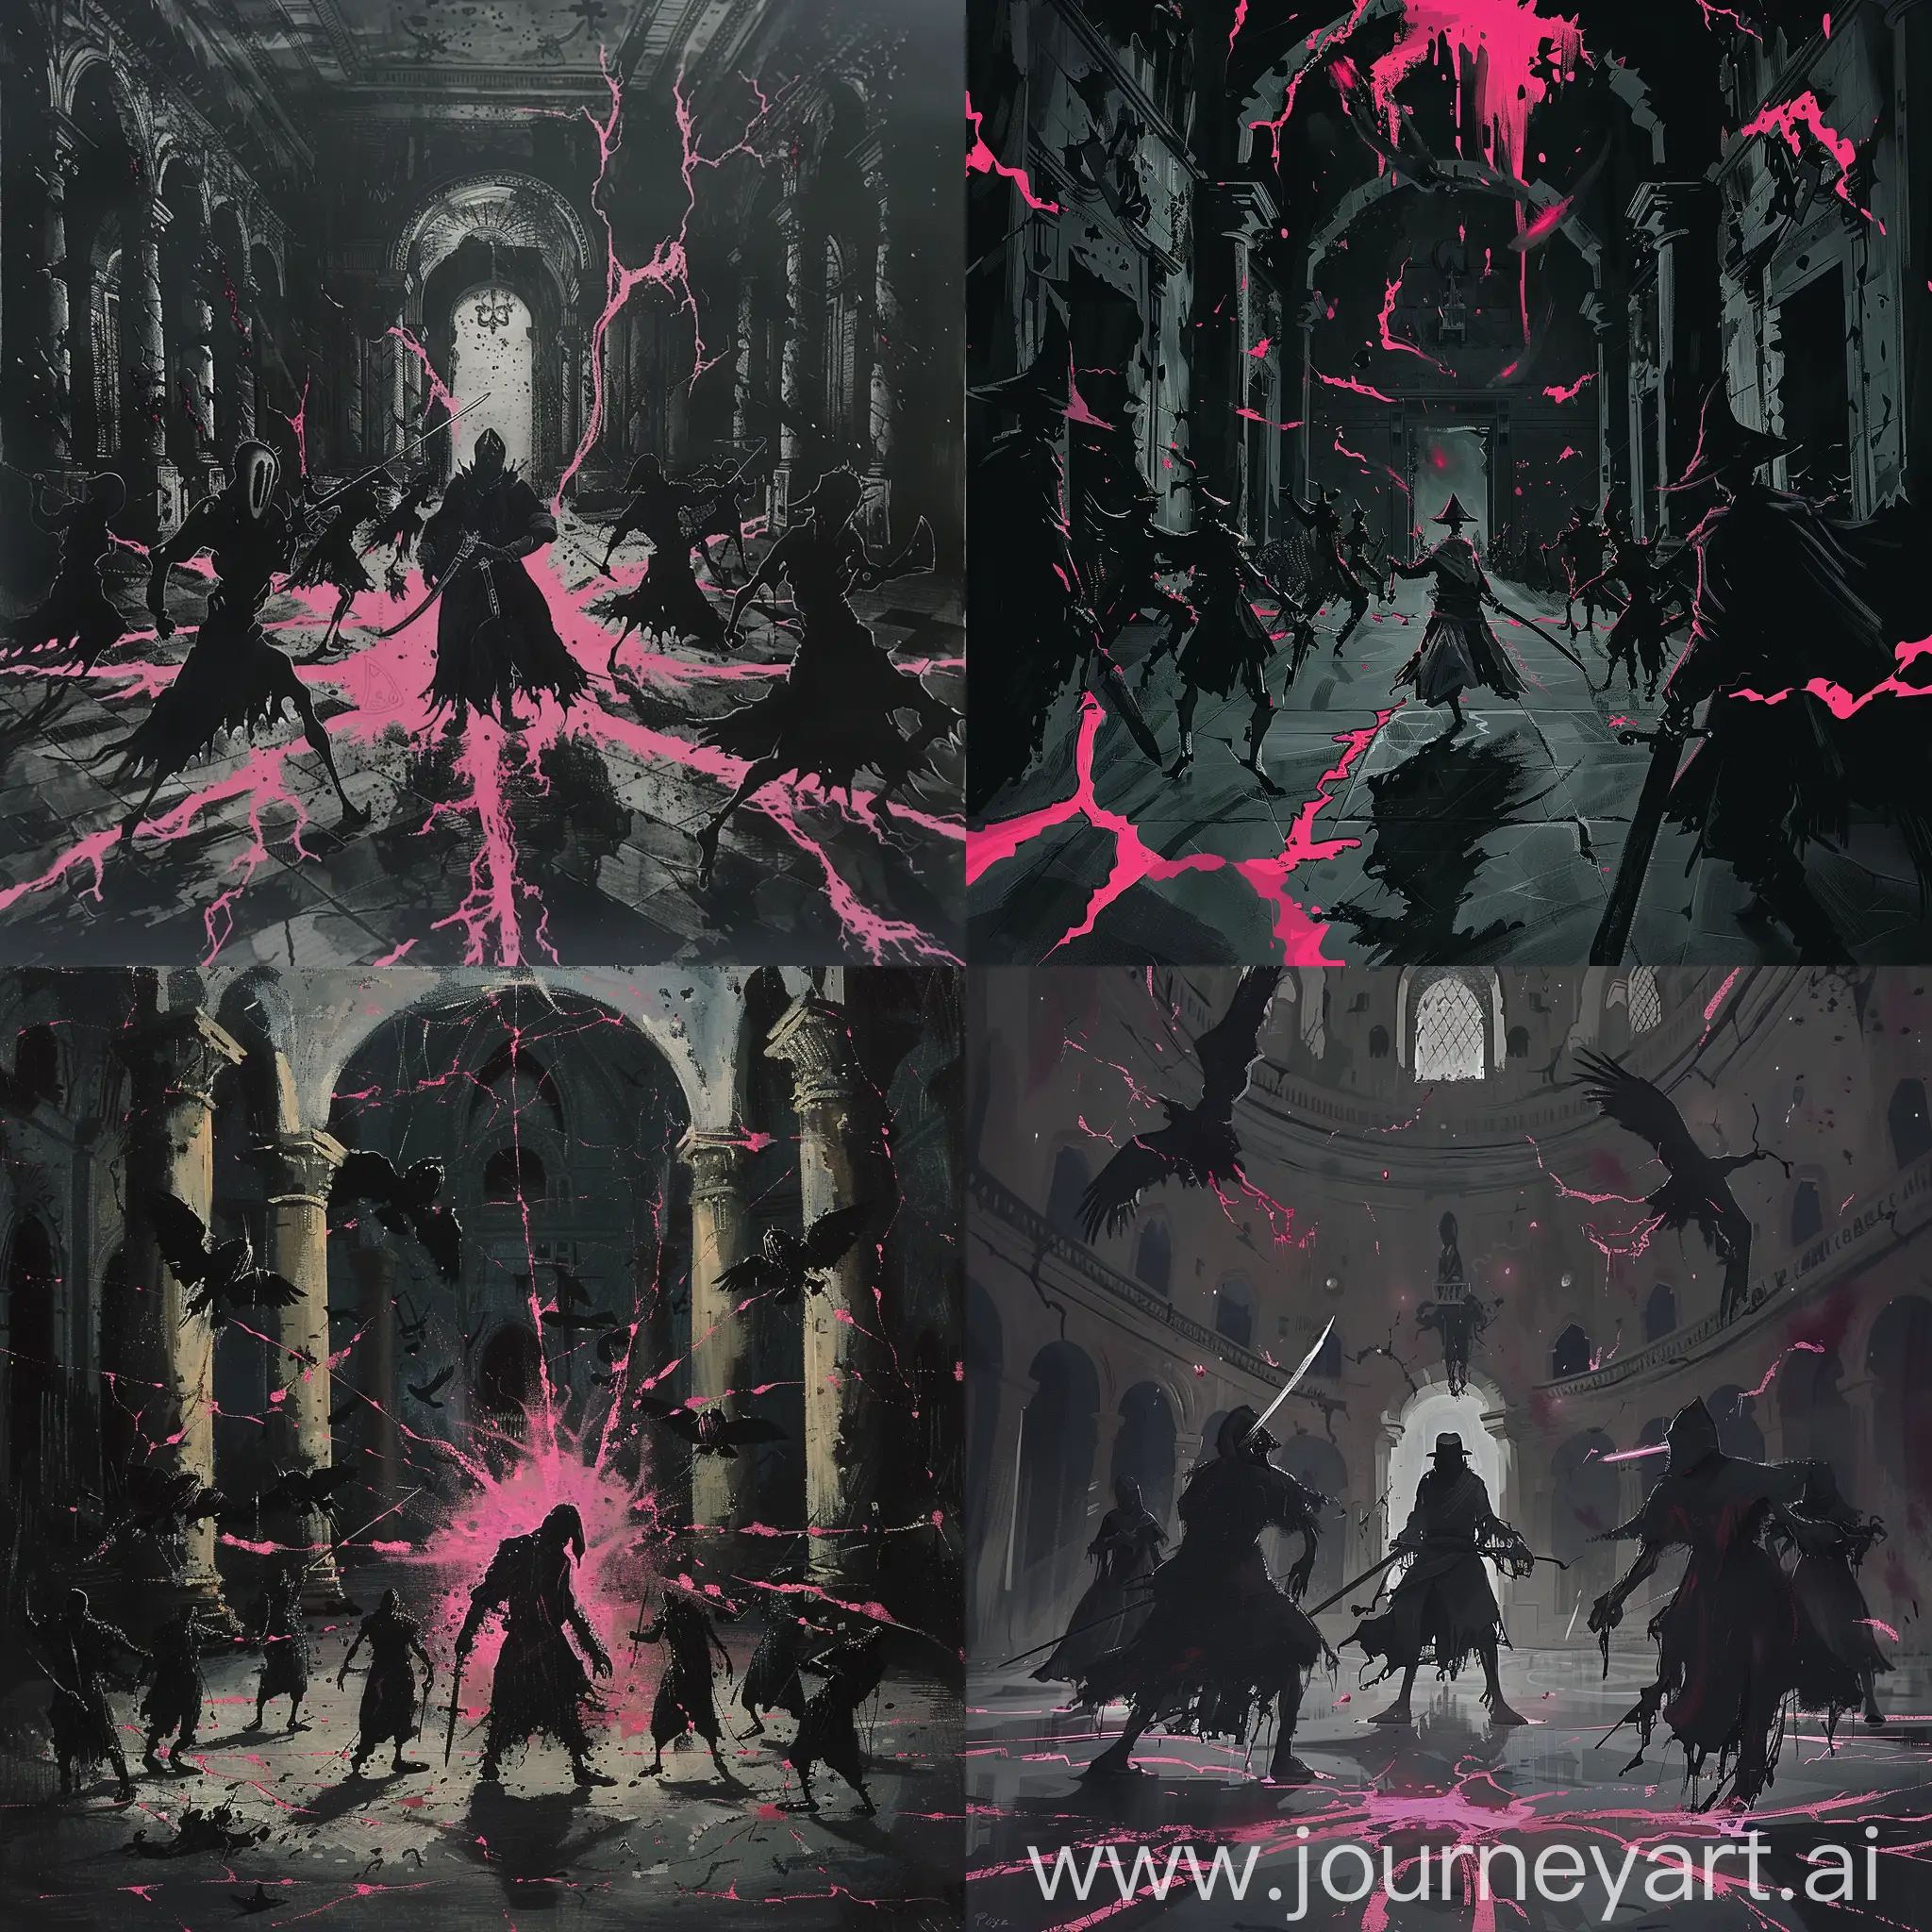 dancing plague in the hall of the castle, in the middle stands a plague doctor with a sword, black colors with cracks of pink radiance